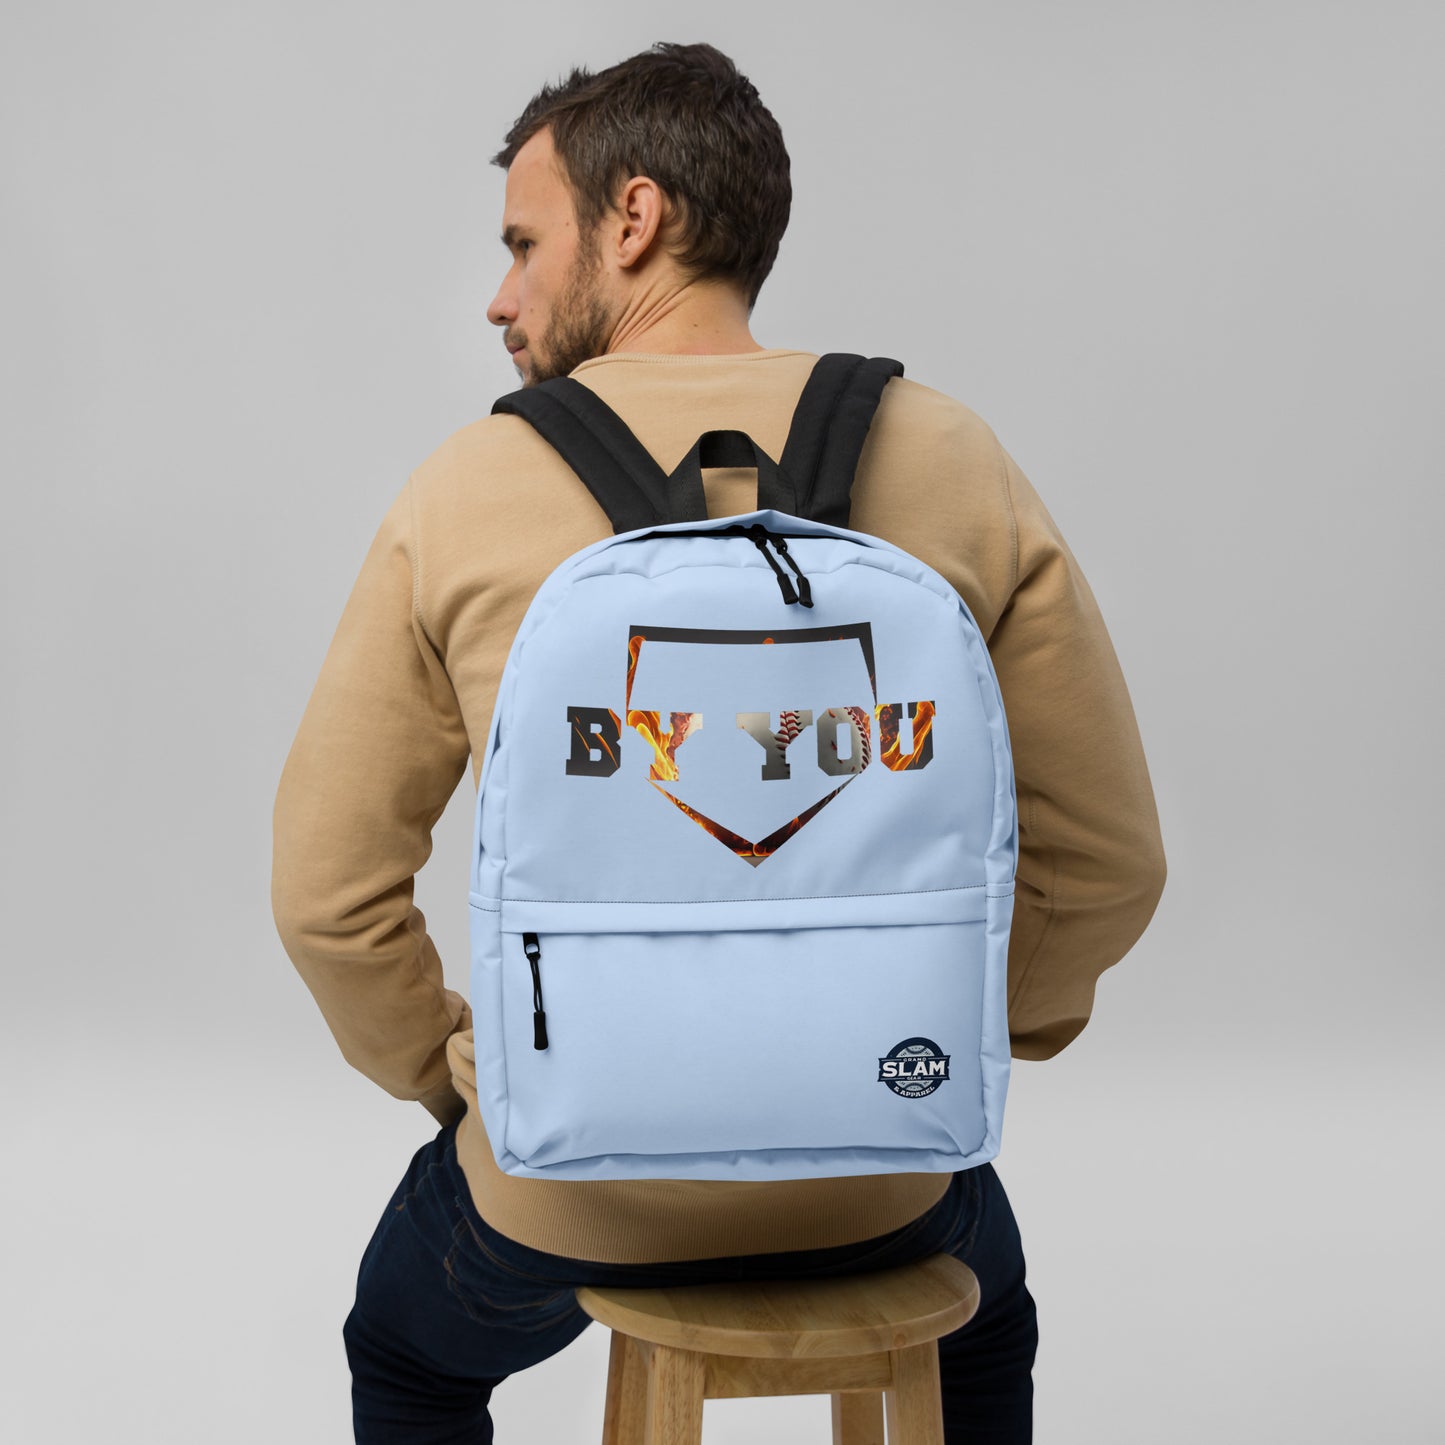 Versatile Medium-Sized Backpack Blue - Ideal for Daily Use & Sports